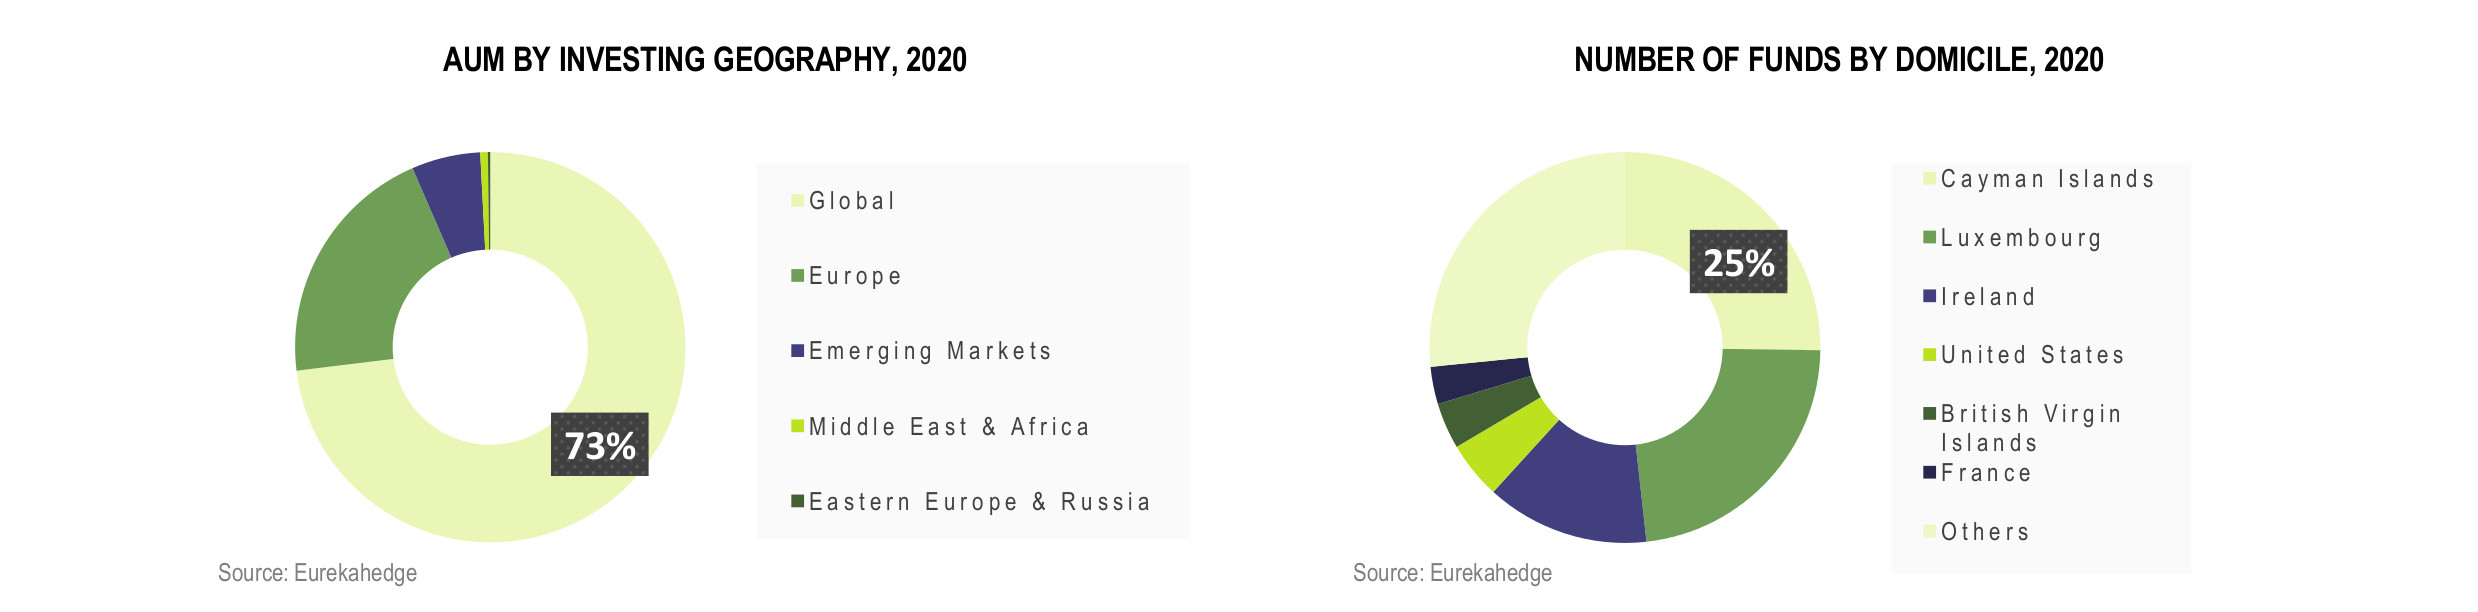 European Hedge Funds Infographic April 2020 - AUM by investing geography and number of funds by domicile